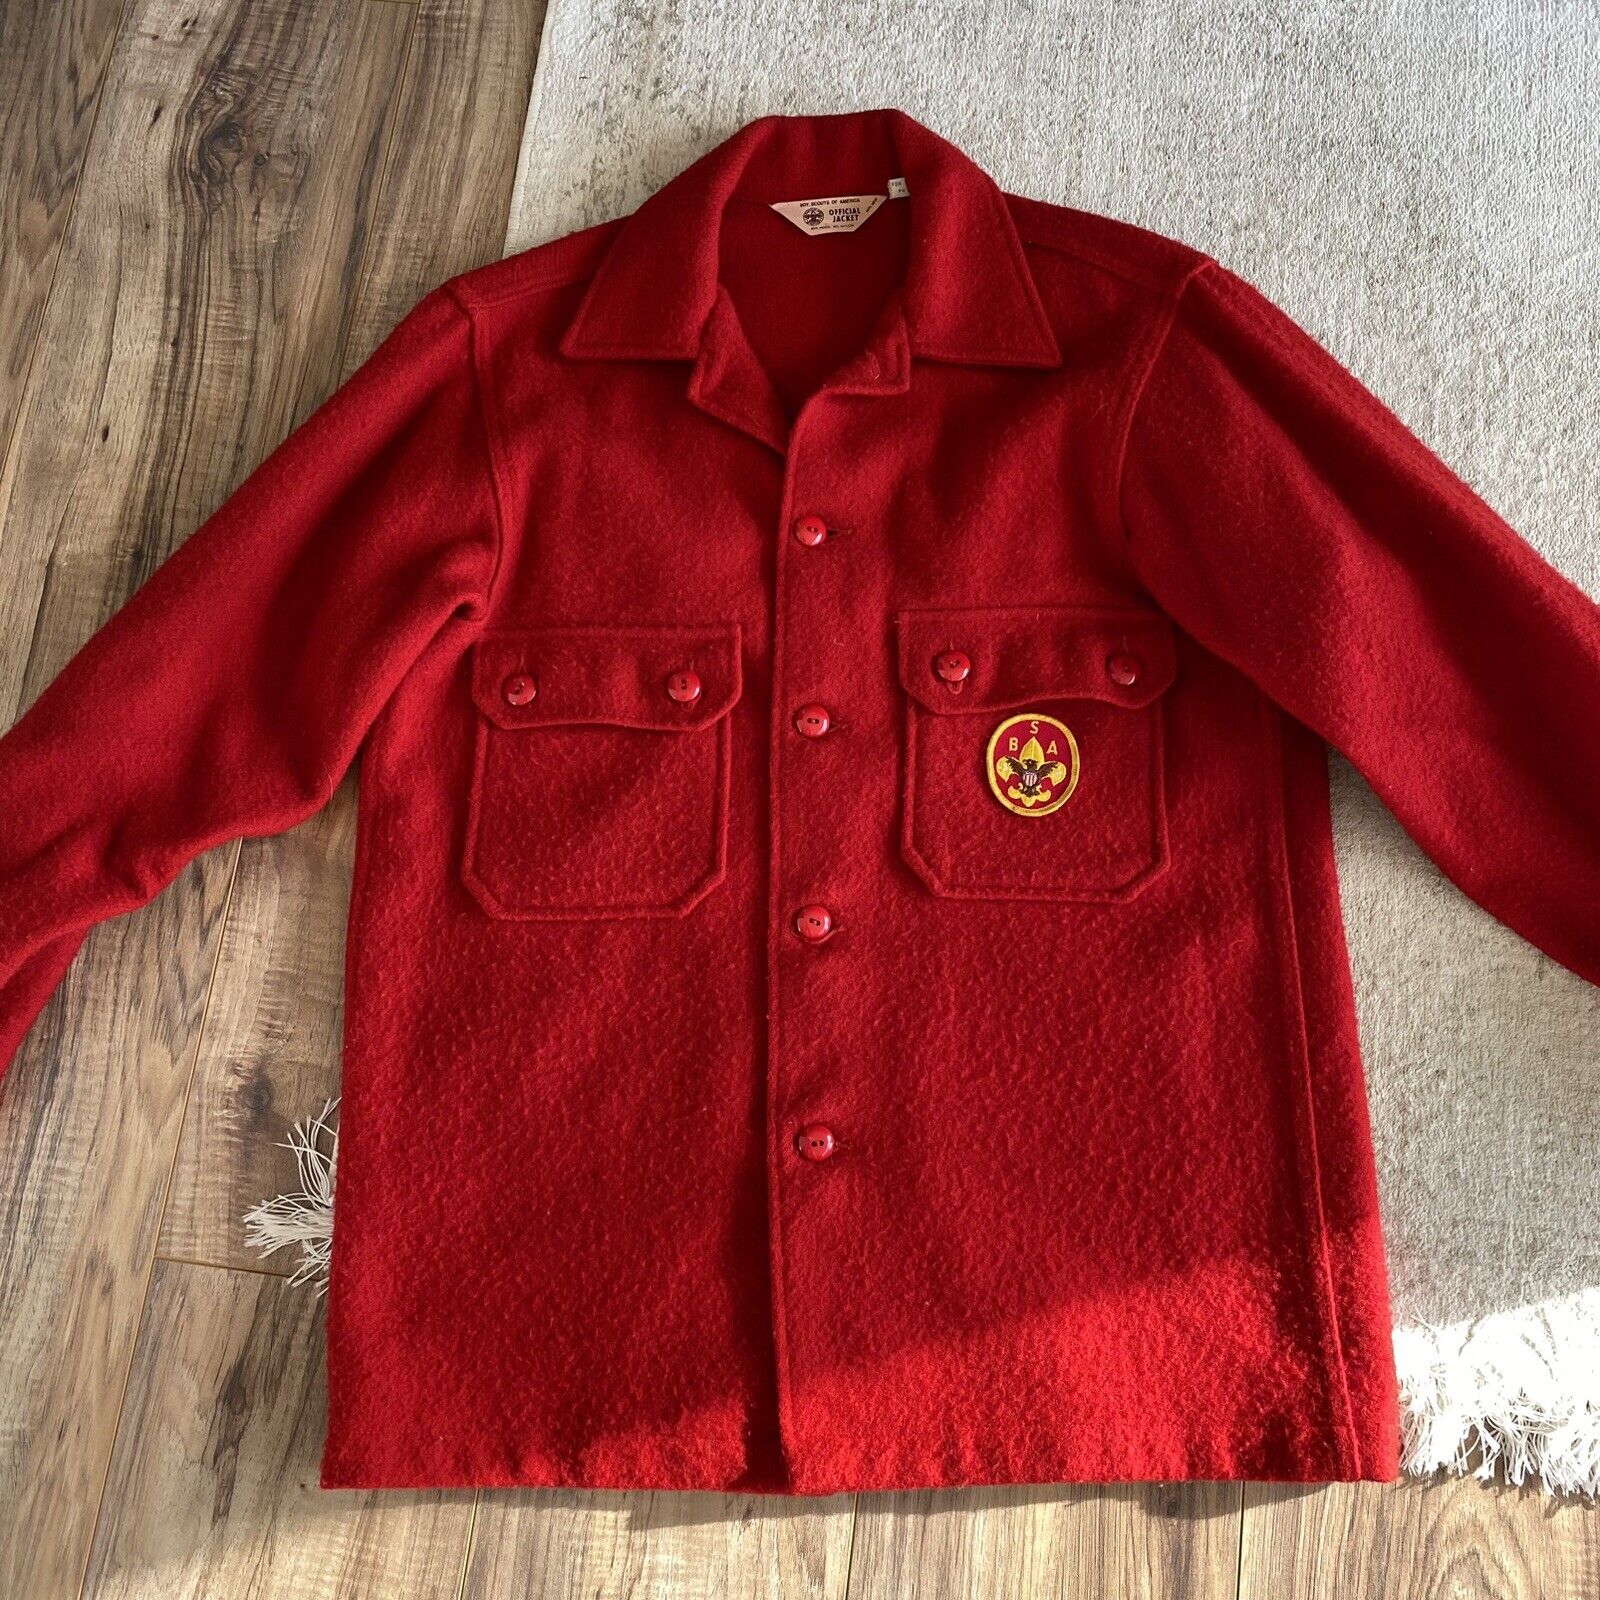 Vintage Boy Scouts of America Official Jacket USA Red Wool  Adult 40 - BSA Patch